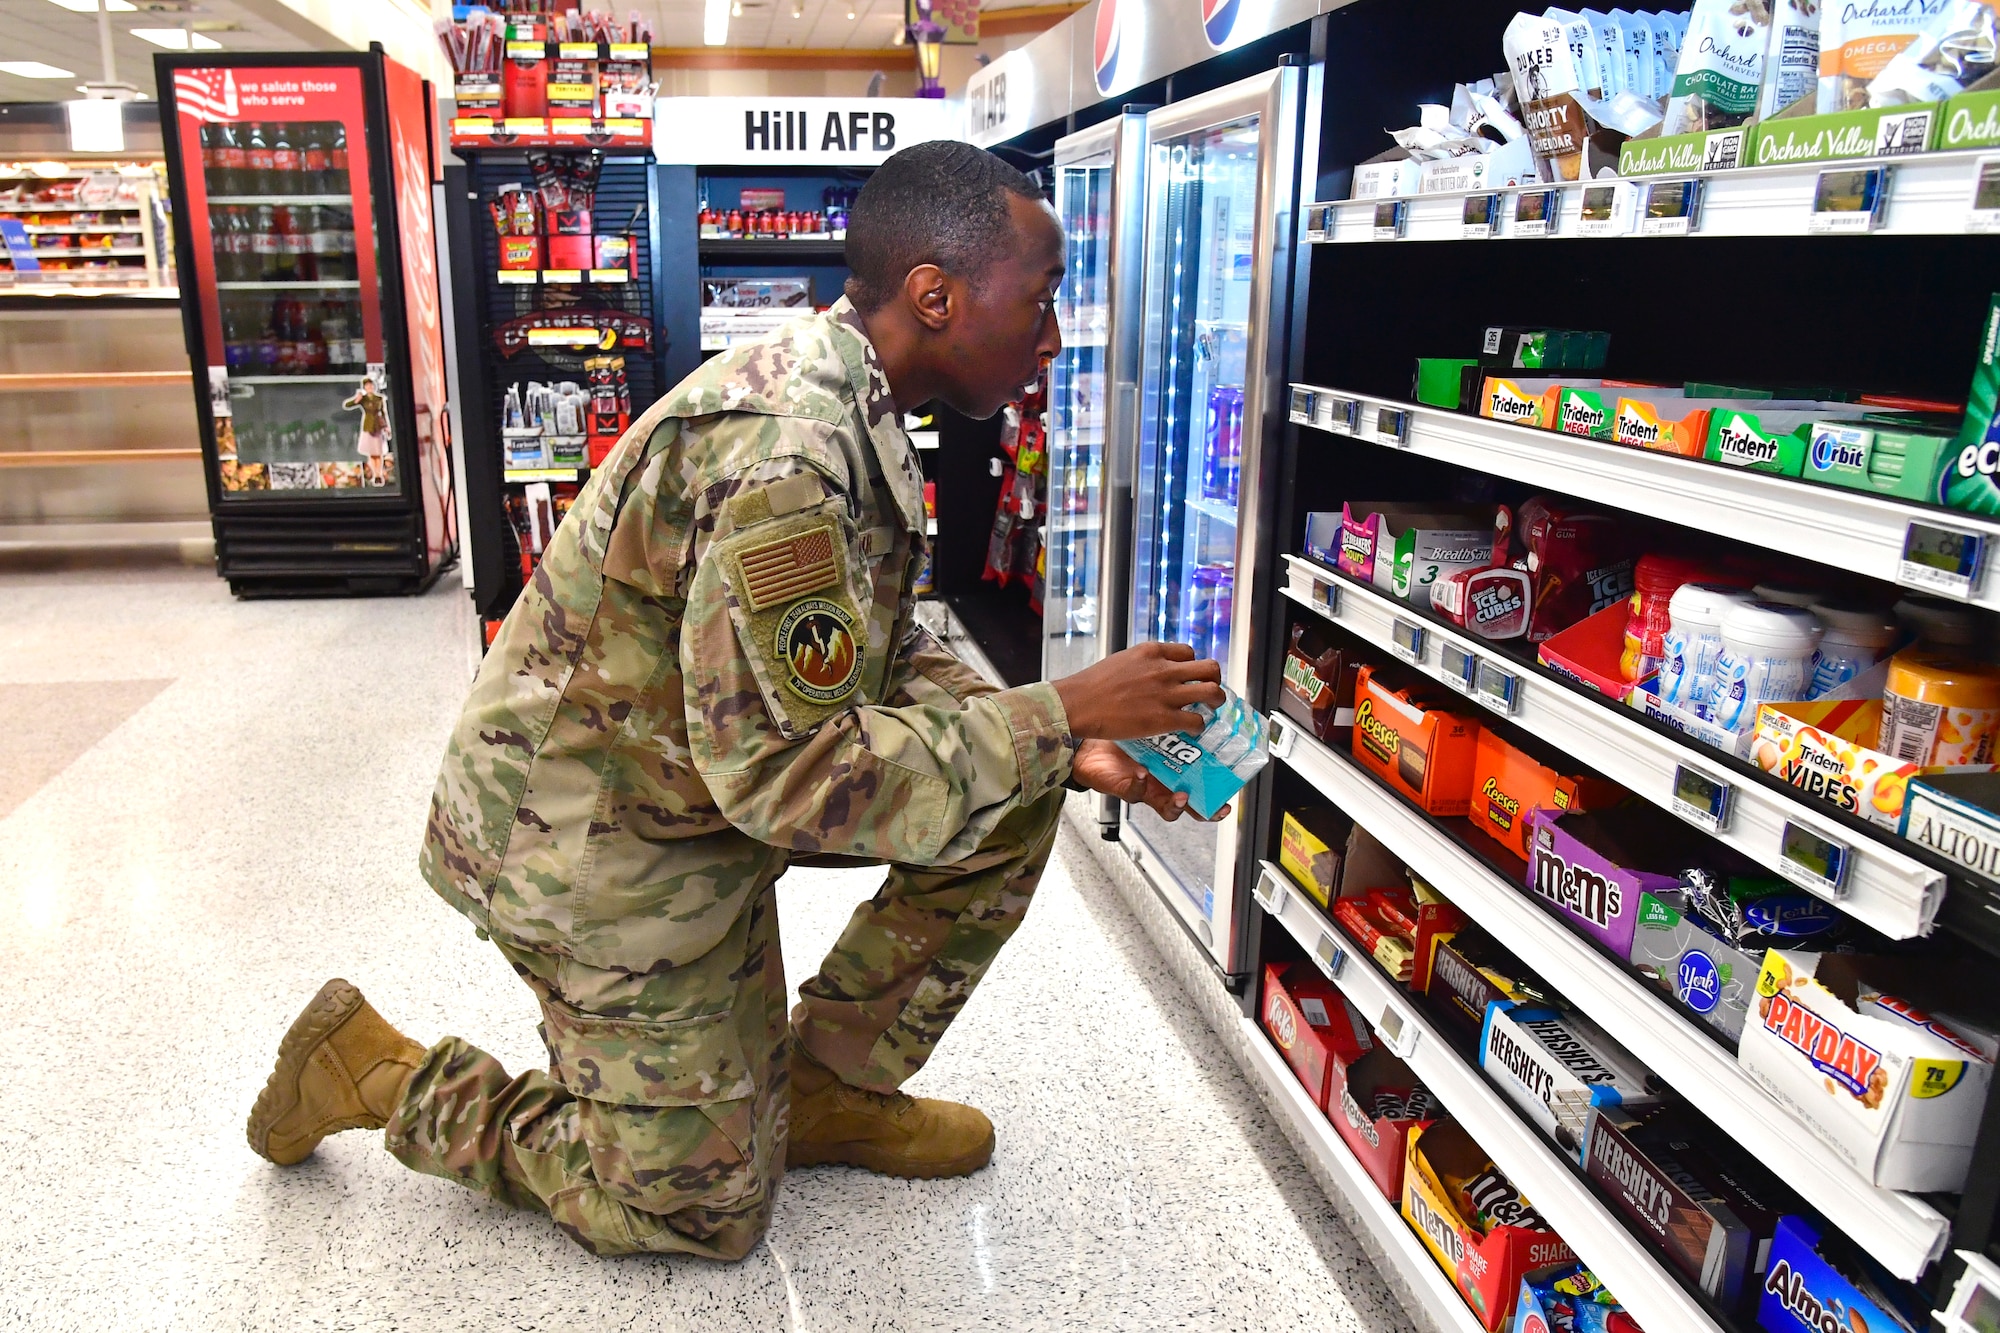 Senior Airman Donald Lamar, 75th Operational Readiness Medical Squadron, stocks shelves at the base Commissary July 26, 2022, at Hill Air Force Base, Utah. Organized by the Air Force Sergeants Associations Chapter 1163, Airmen from across the installation have been volunteering to restock shelves at the store. (U.S. Air Force photo by Todd Cromar)